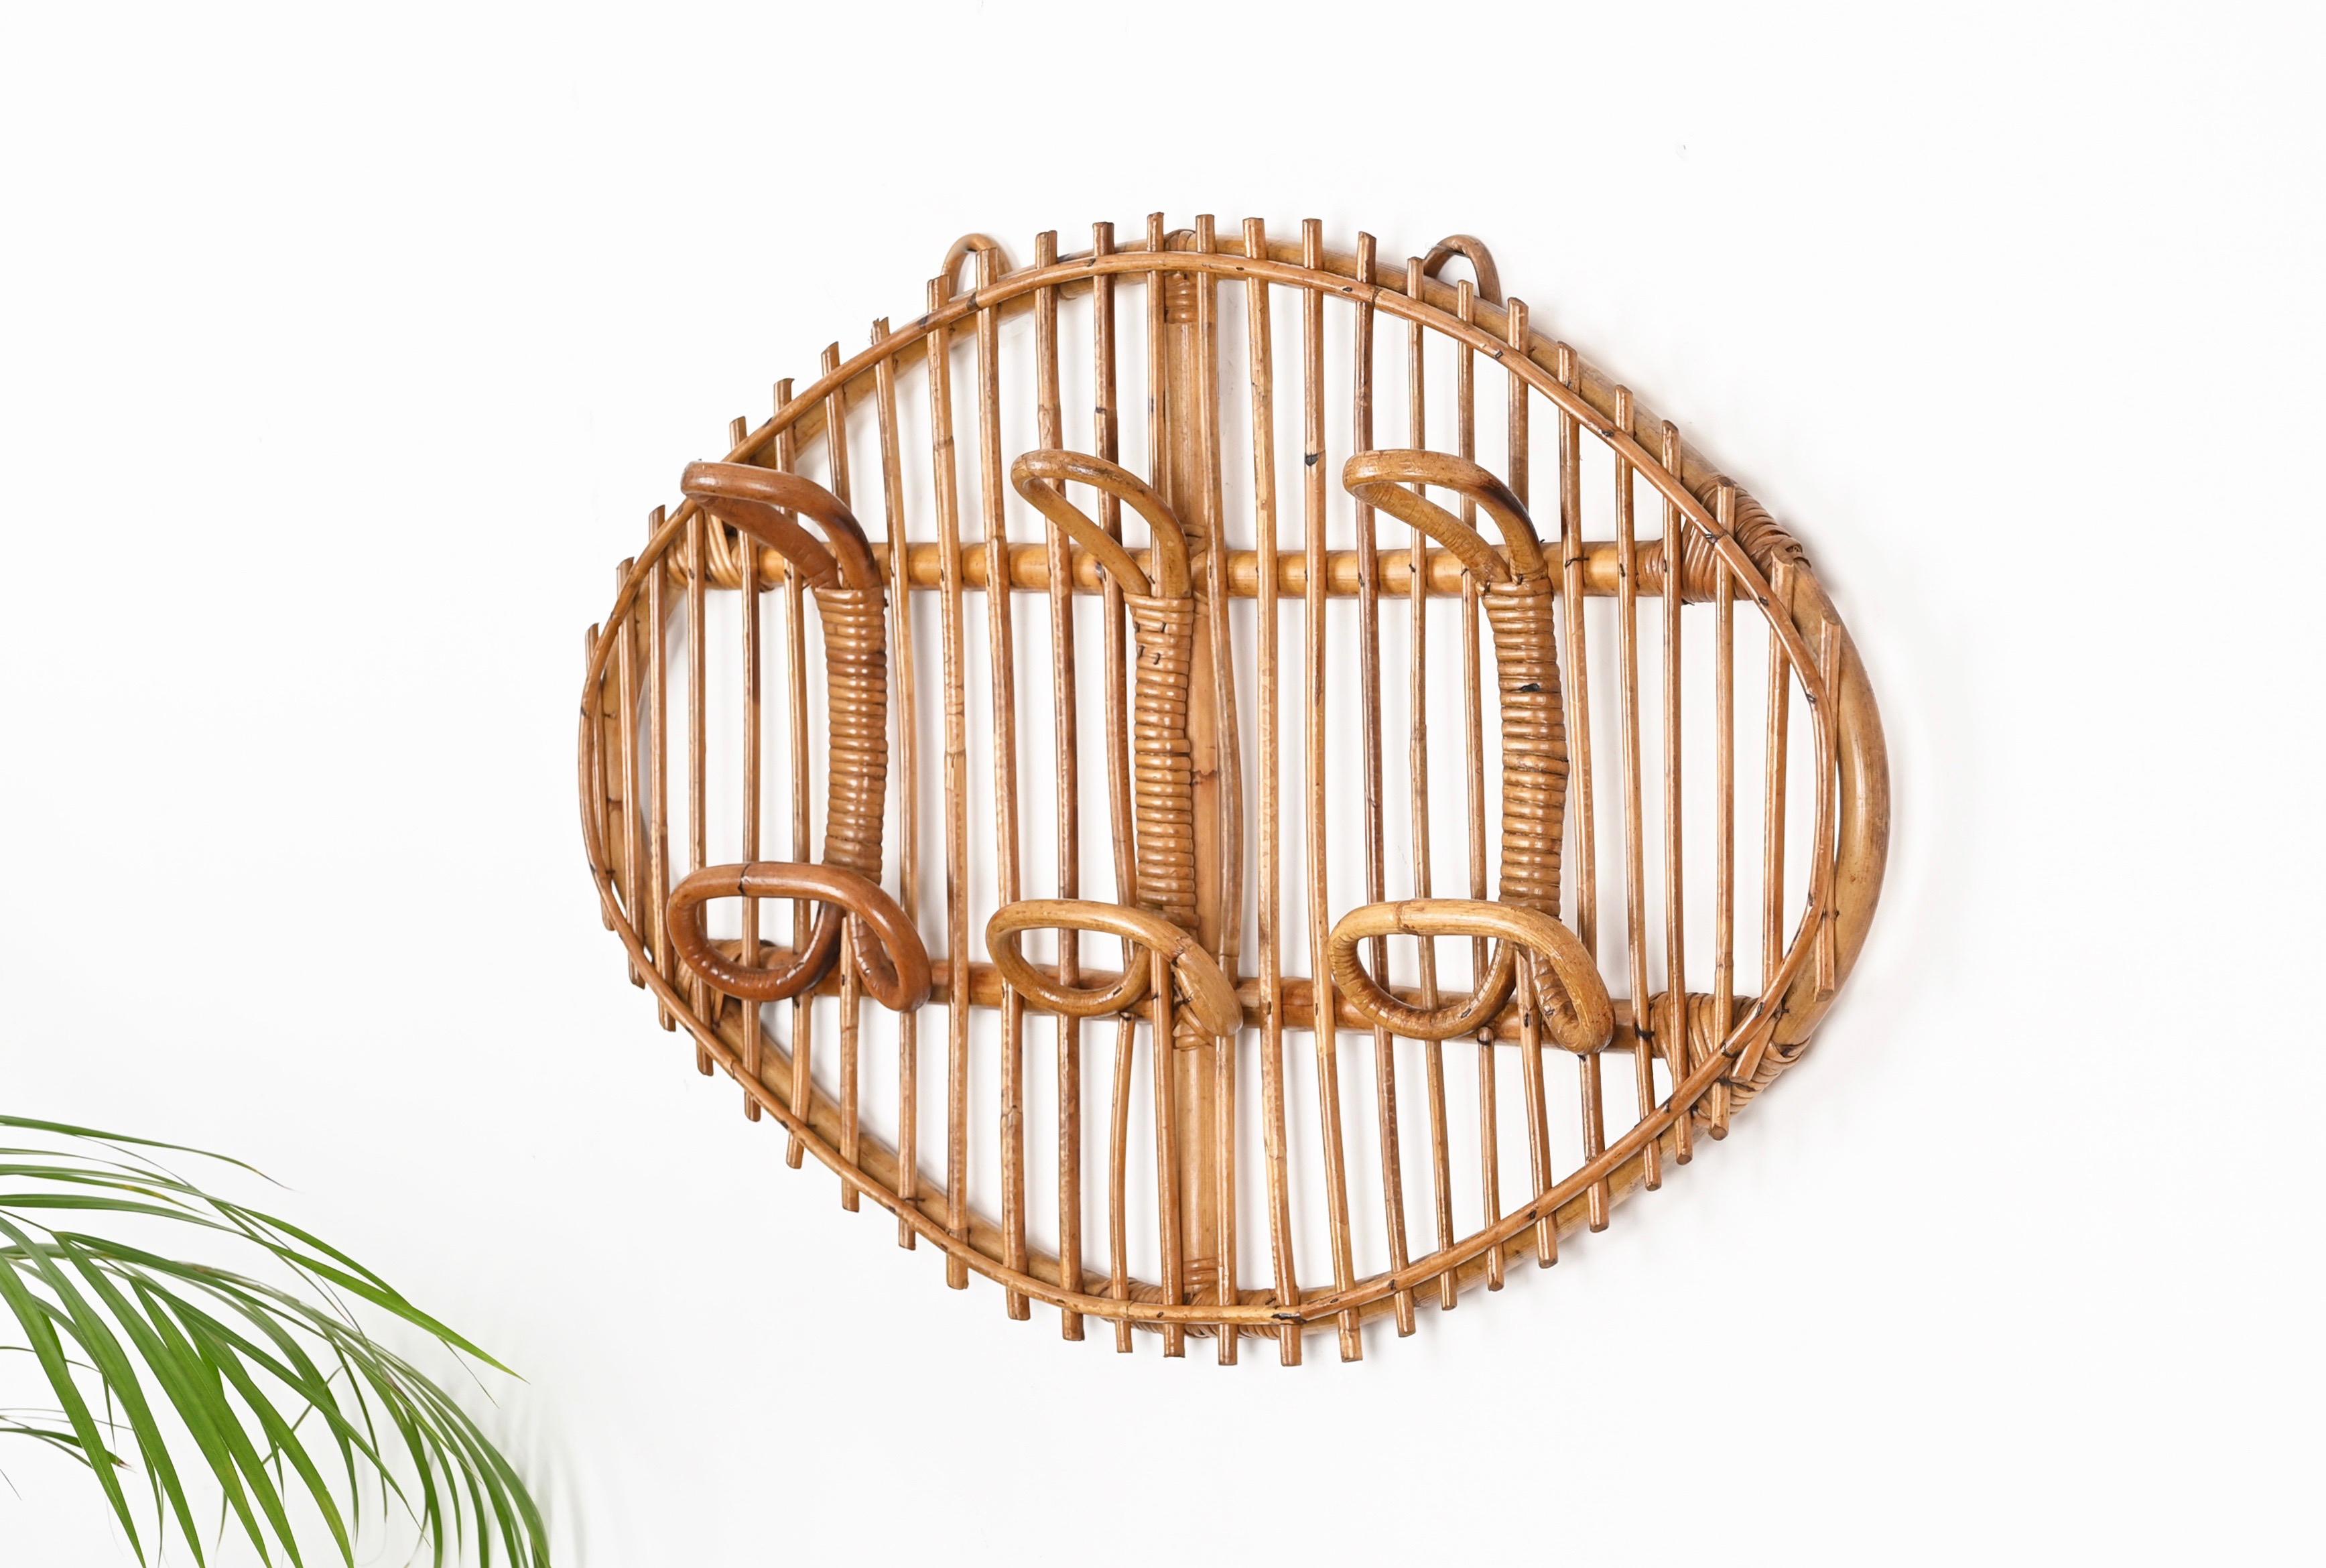 Gorgeous Mid-Century French Riviera style coat rack in curved rattan, bamboo and woven wicker. This delightful piece was designed in Italy during the 1960s.

This unique item features an oval frame in curved bamboo with three perfect hooks made in